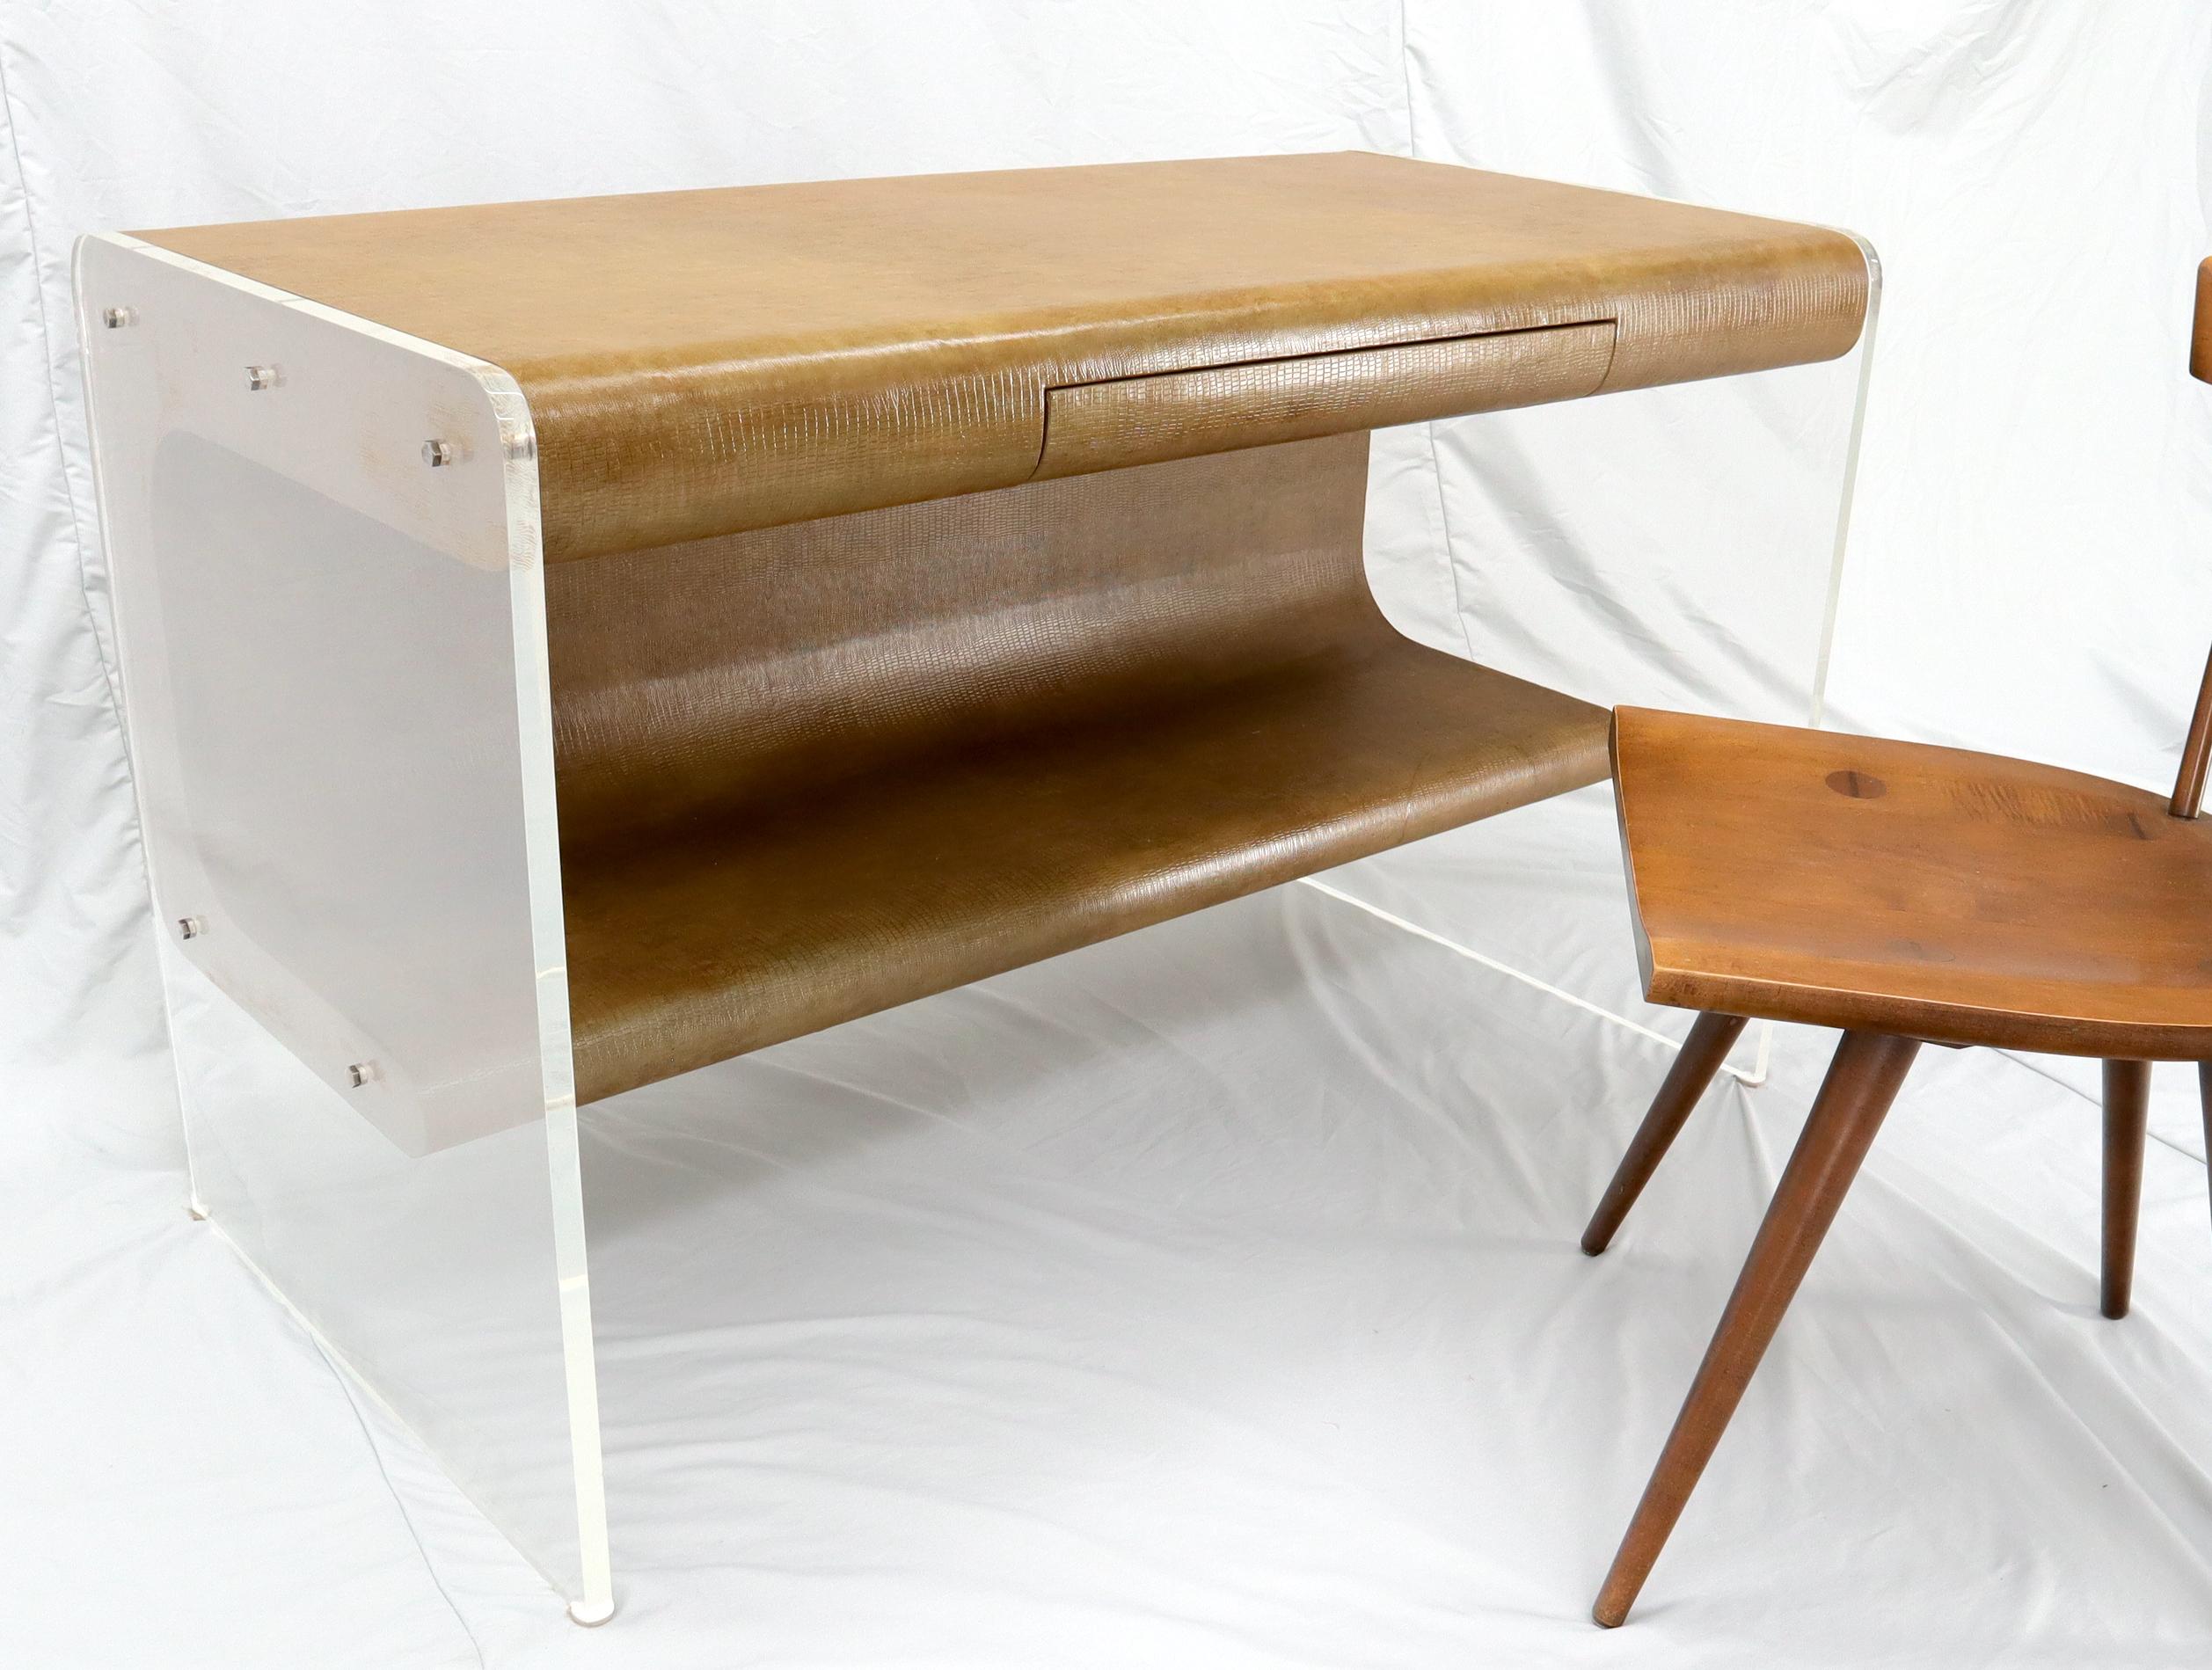 Mid-Century Modern sculptural futuristic shape desk writing table with one drawer. Kagan Space Age attribution influence.